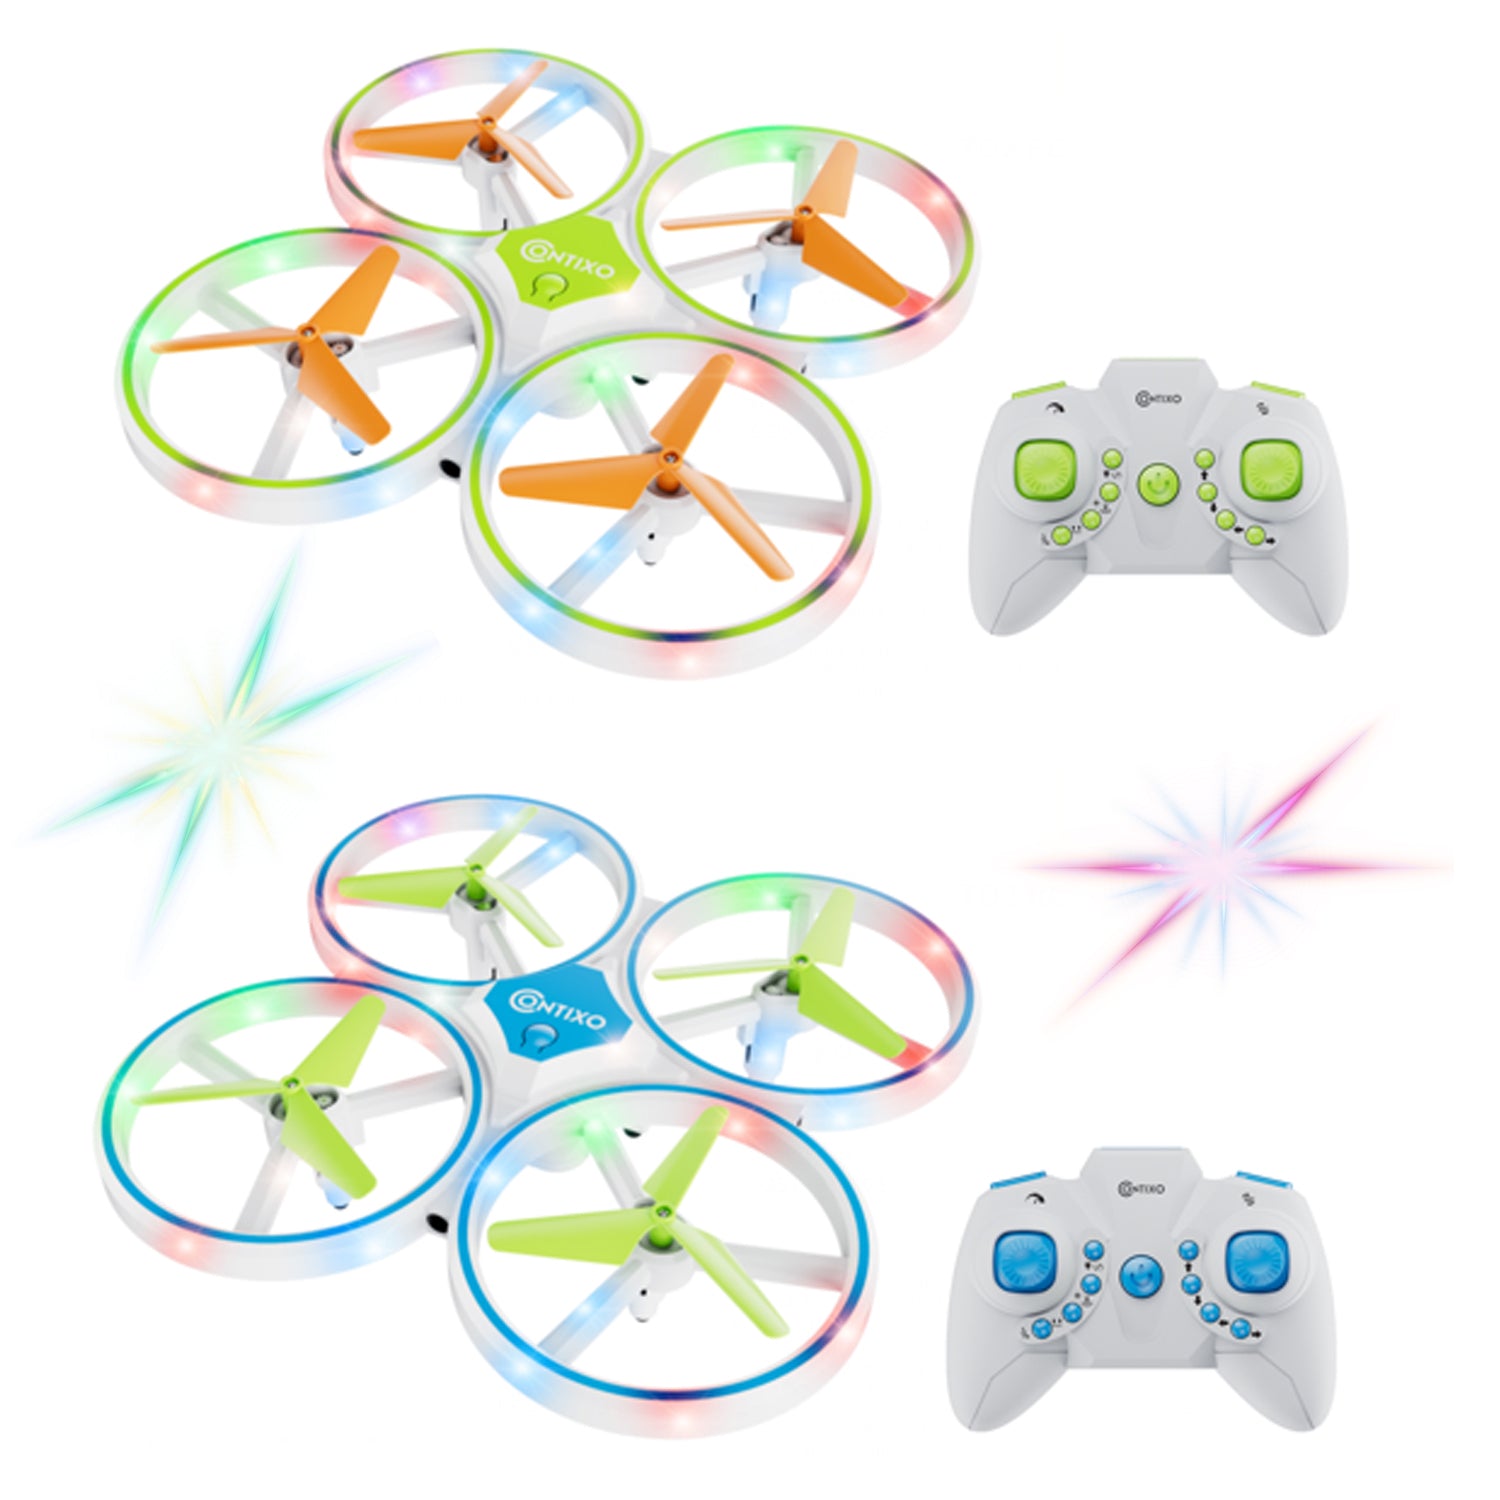 Contixo 7" TD1 Dragonfly Drone with LED Light Effects